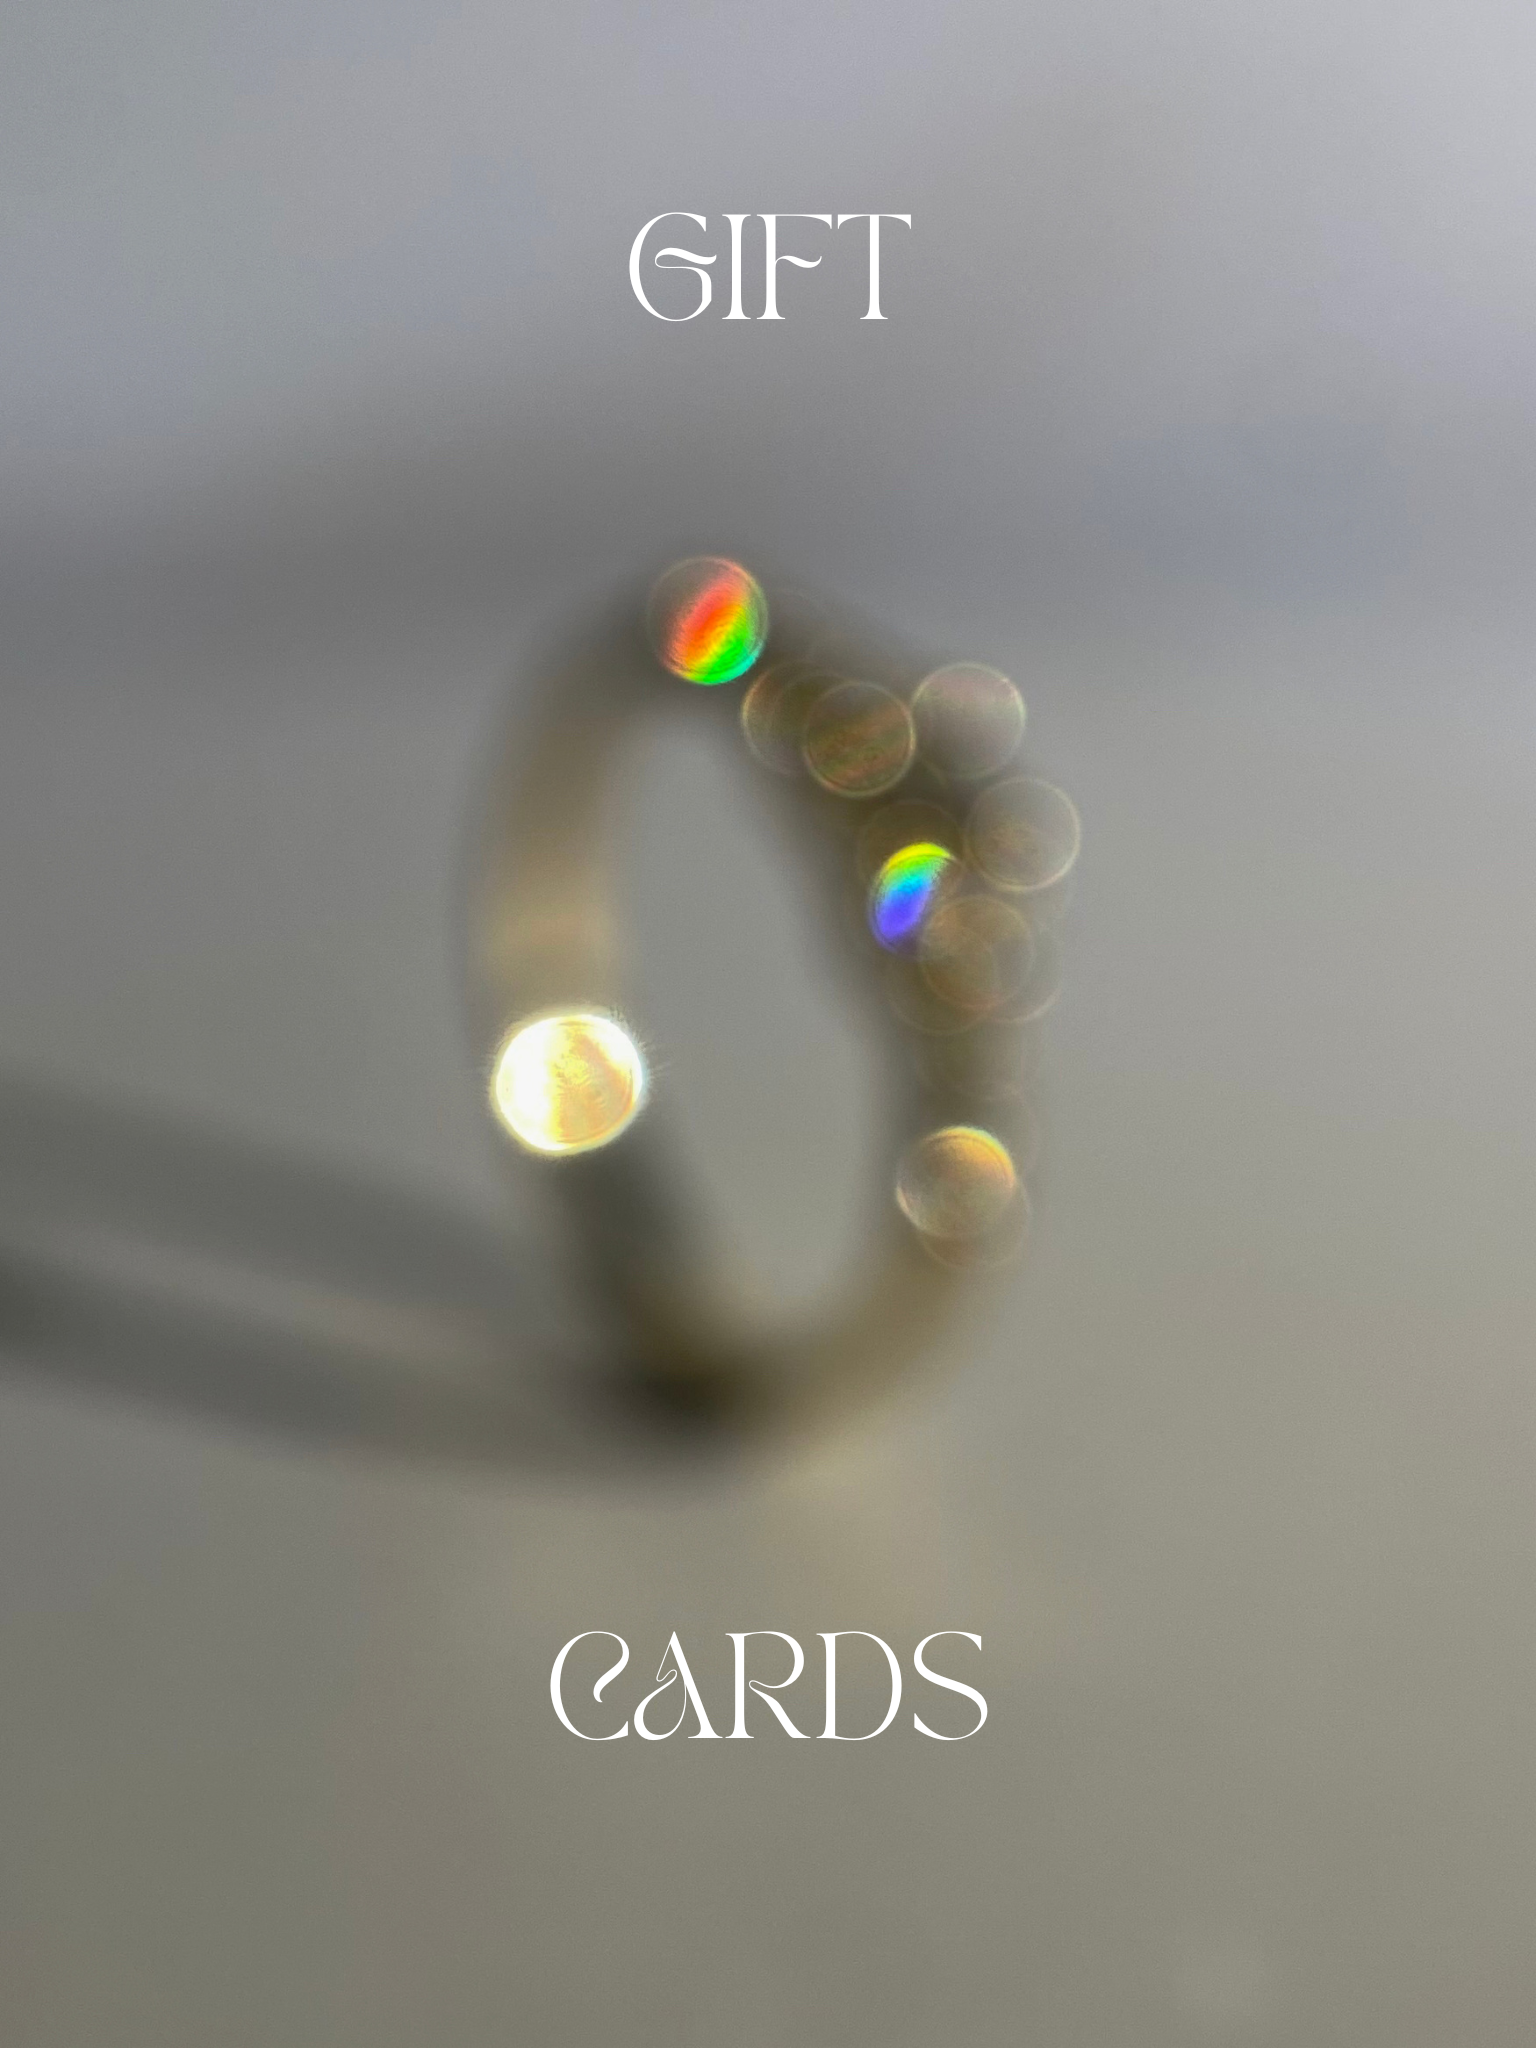 Out of focus ring with rainbow light spots saying “Gift Cards”